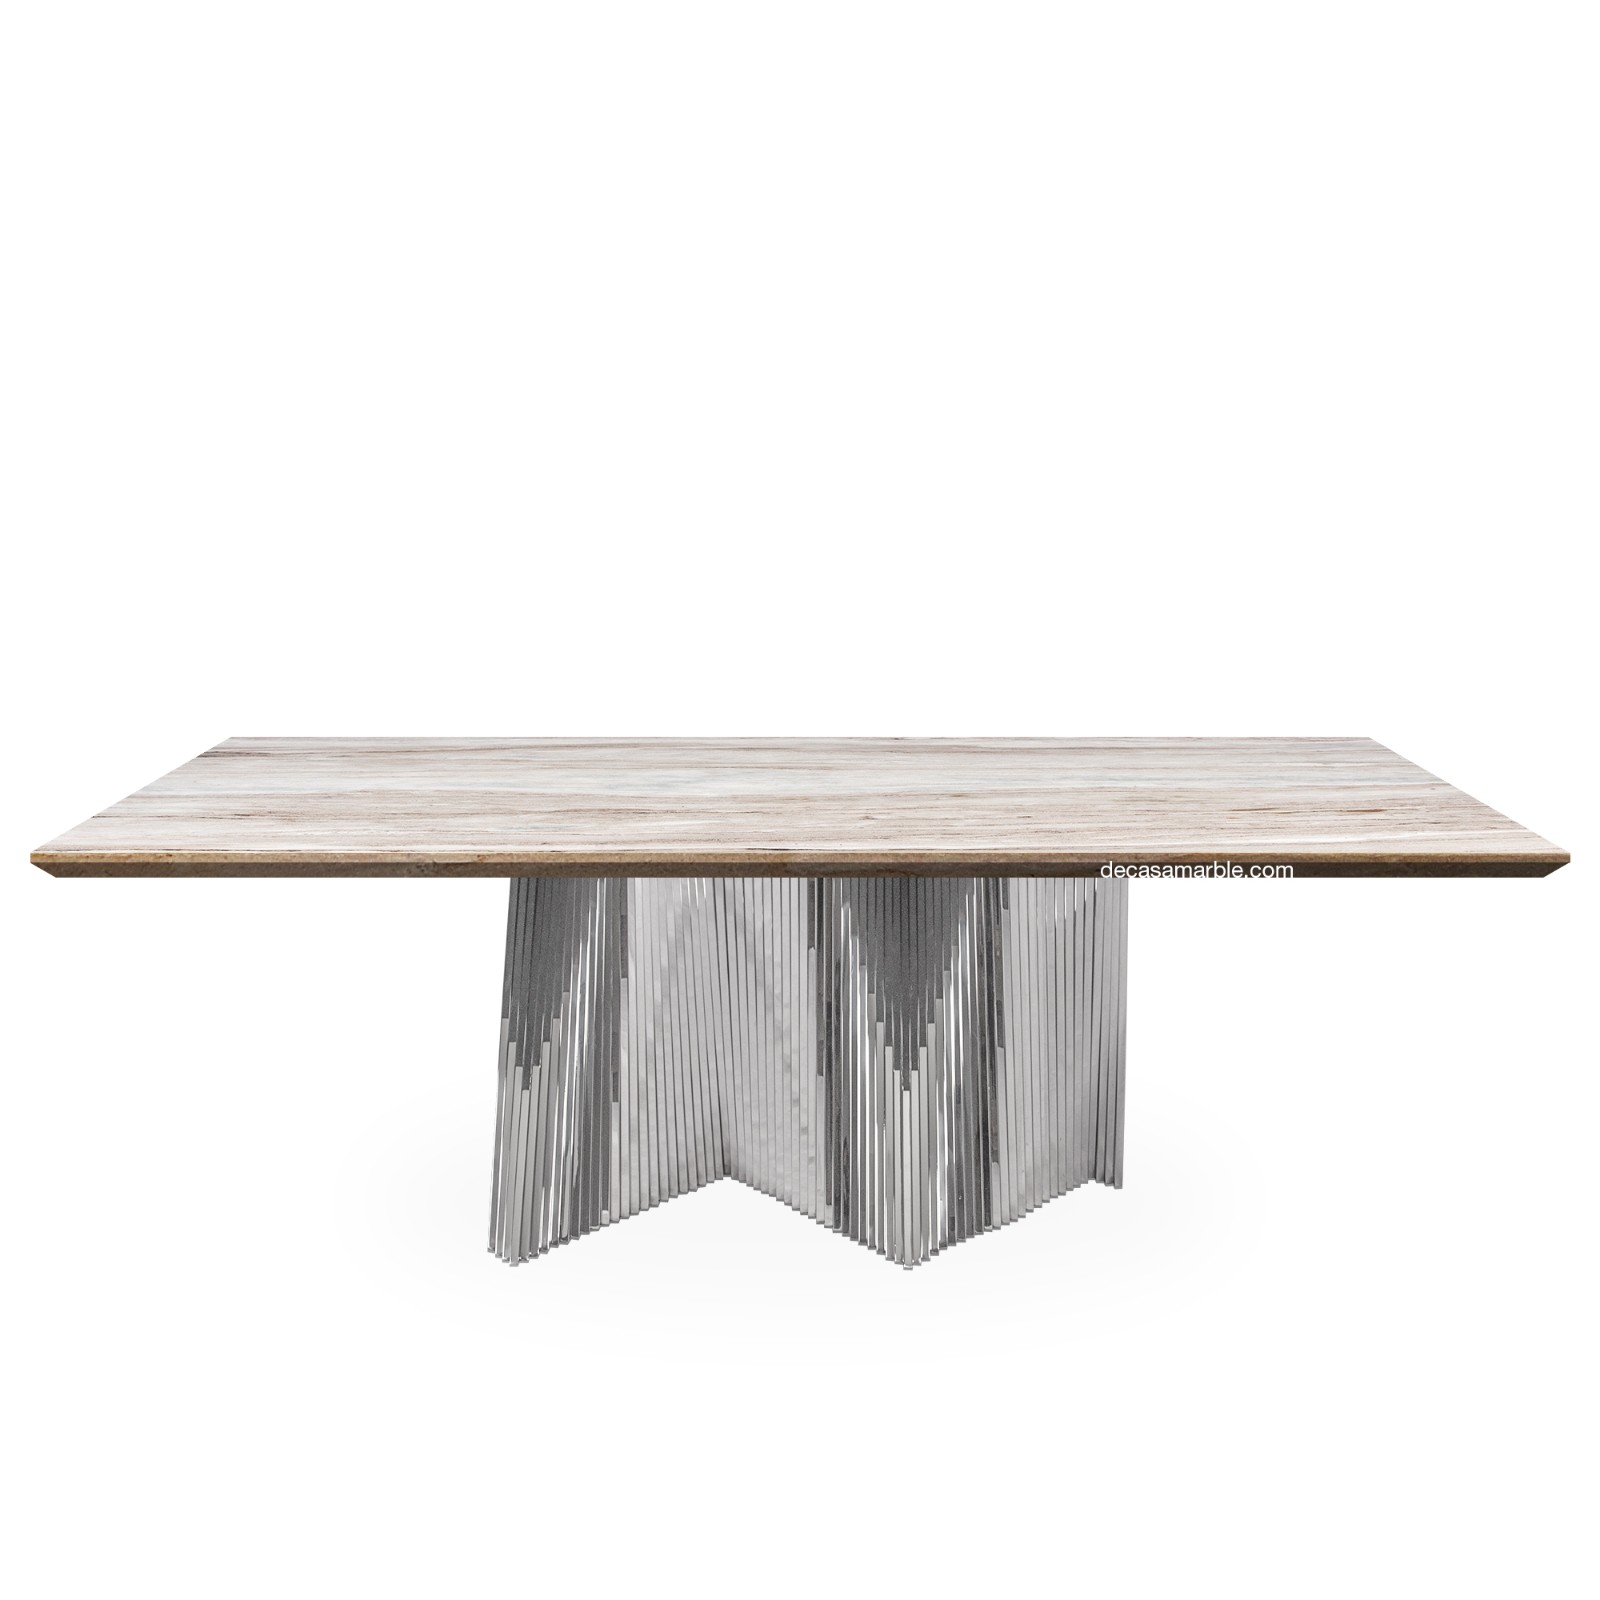 Moore 2 | Art Series | Decasa Marble Marble Dining Table